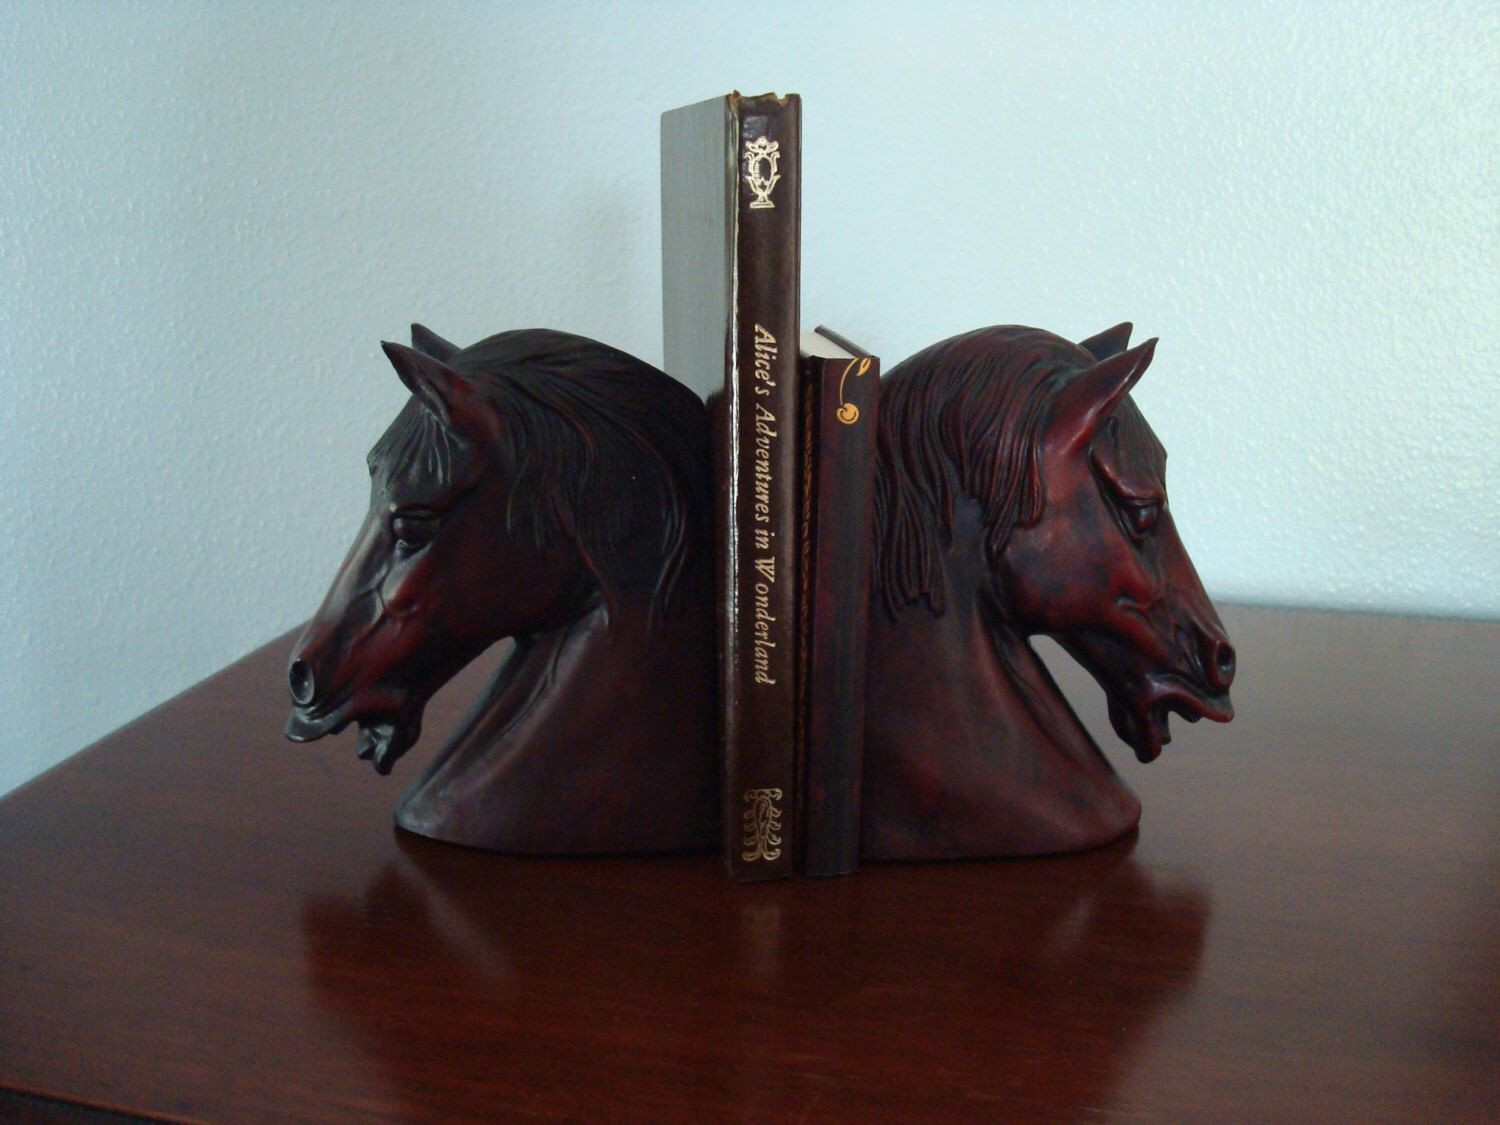 18 Fabulous Horse Head Vase 2024 free download horse head vase of pin by k g wilkins on horse bookends pinterest horse head with vintage bookends horses handsome pair of horse head bookends 1980s resin brown bookends horses detailed brow